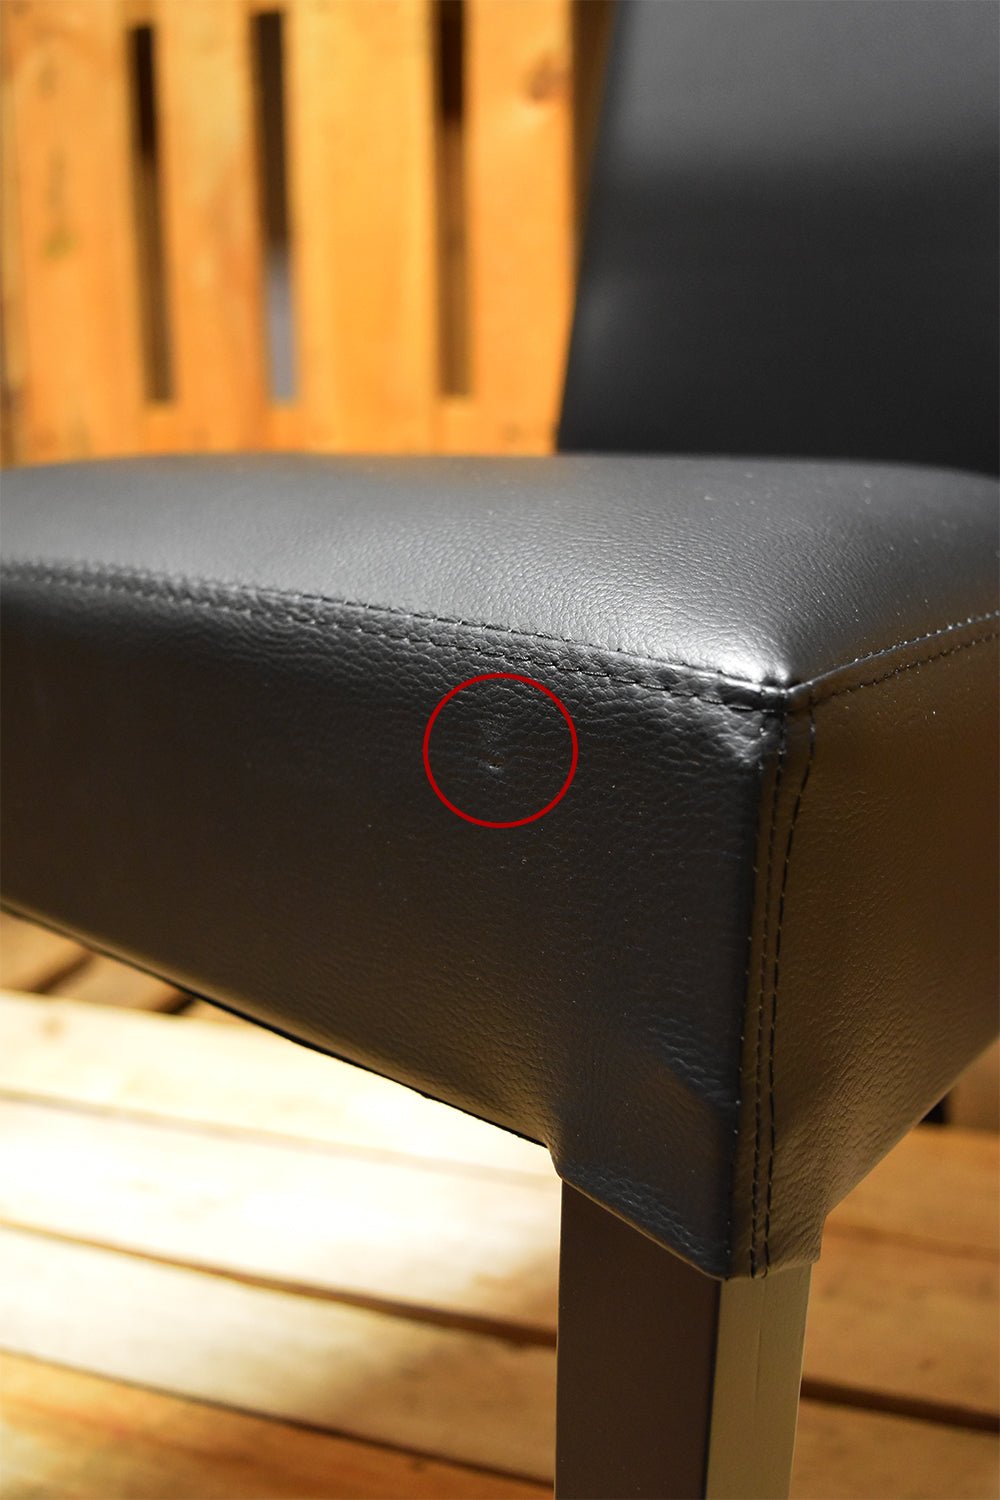 Stock model 36 chairs upholstered in black imitation leather